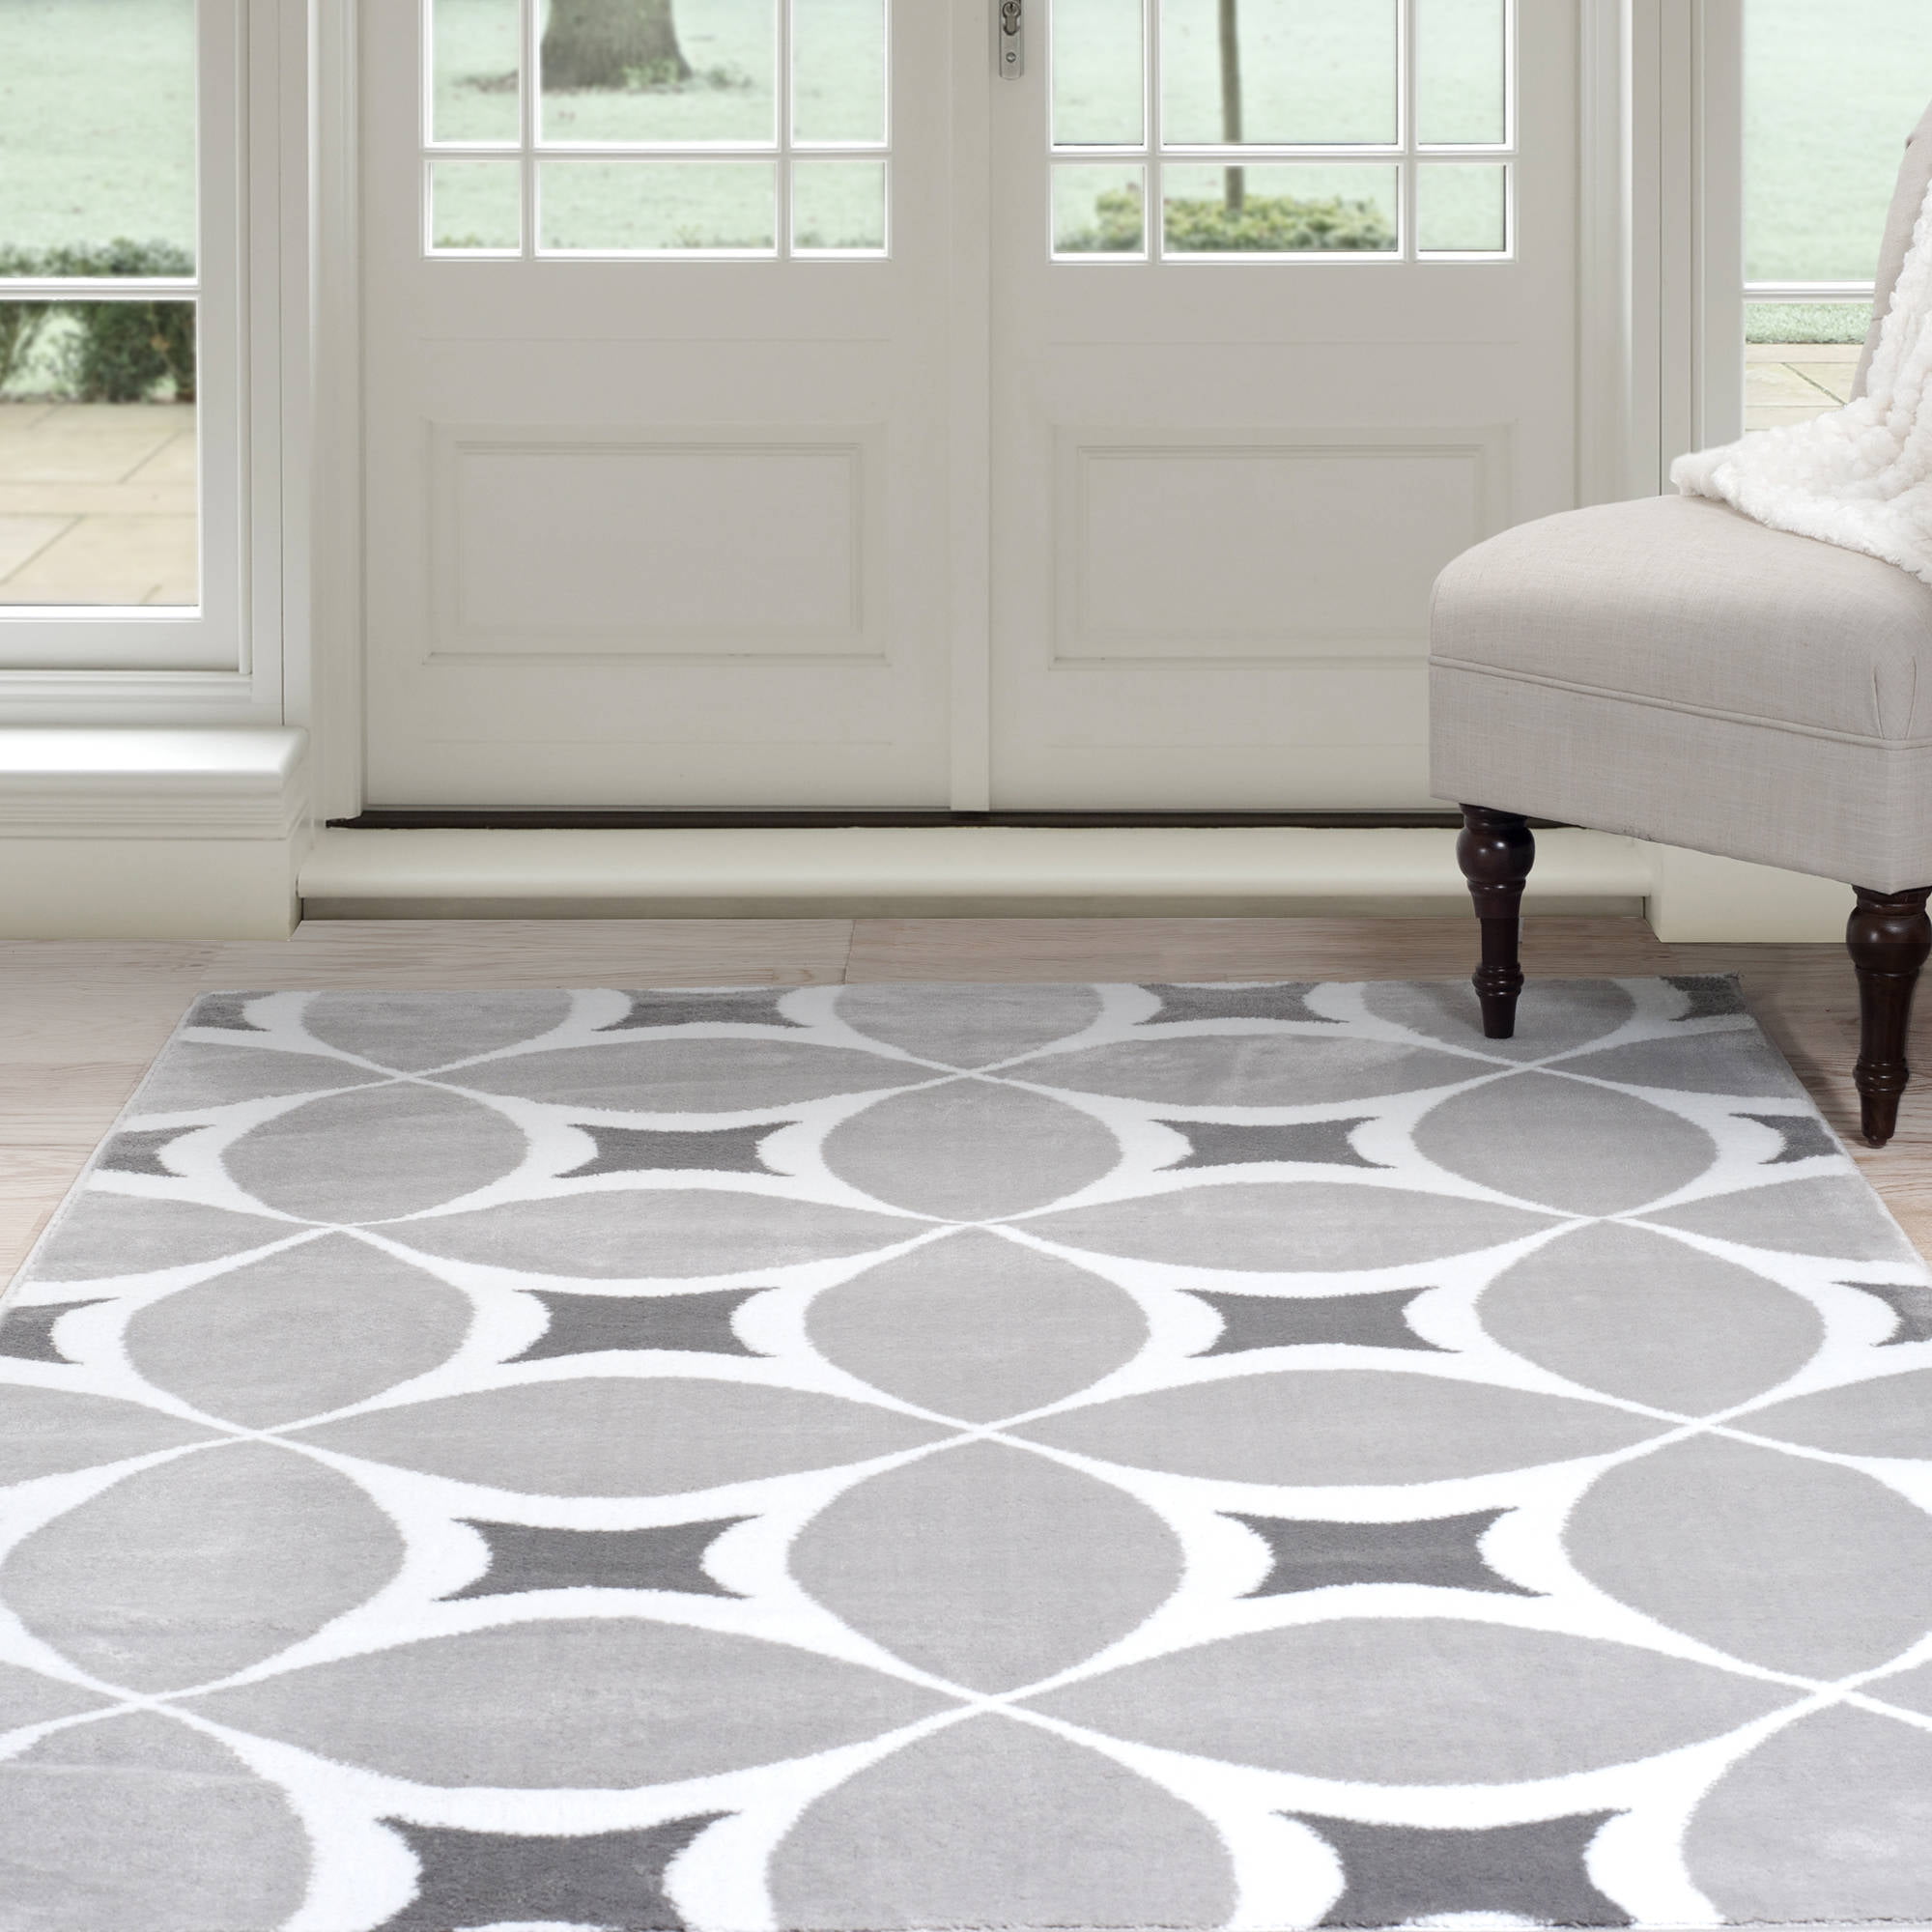 Somerset Home Geometric Area Rug, Grey and White